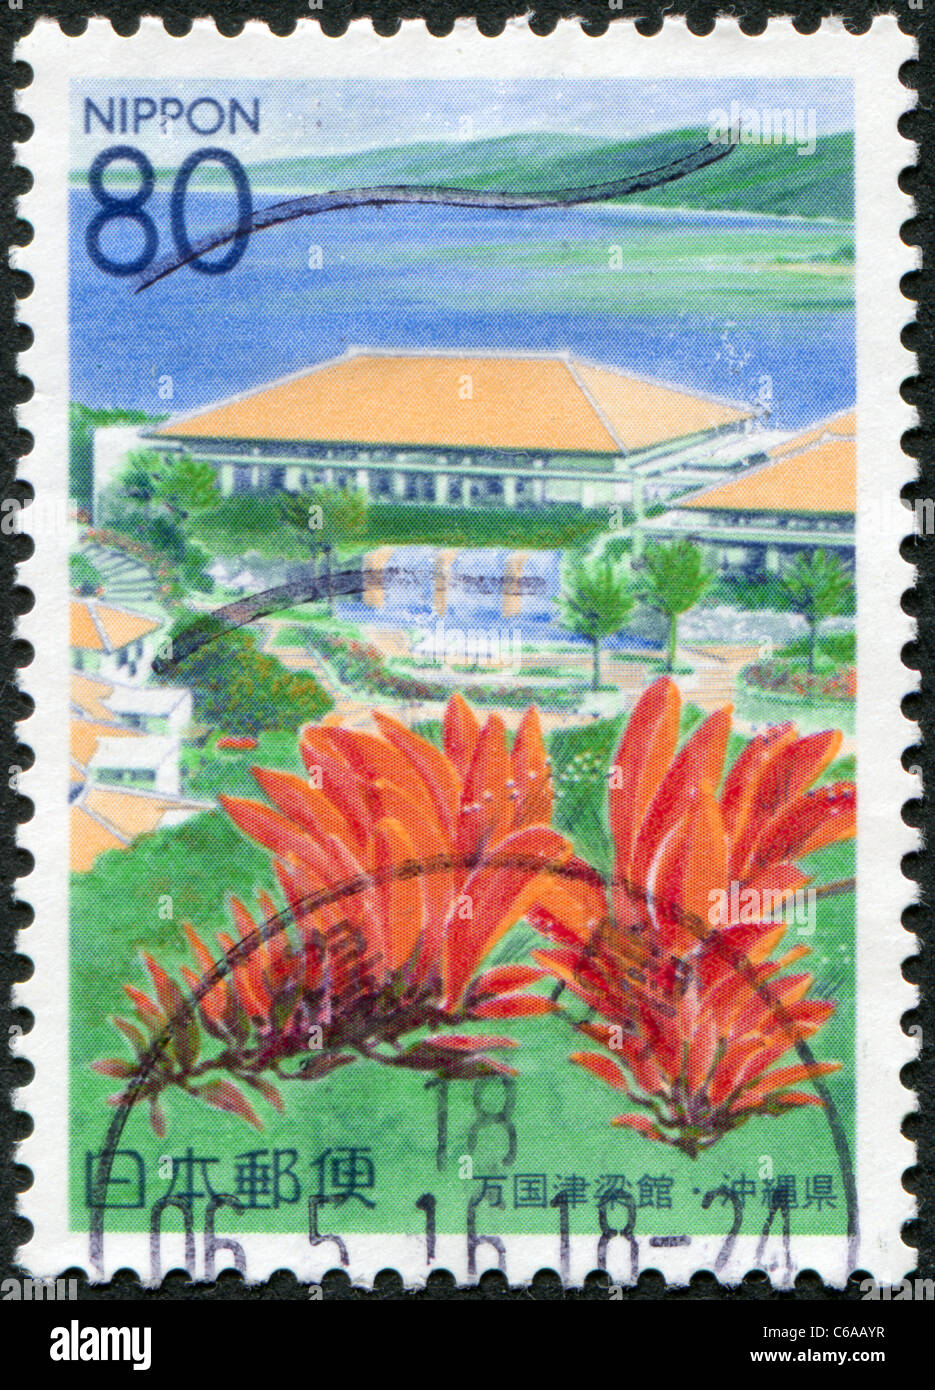 JAPAN - 2000: A stamp printed in Japan, depicts a conference center Bankoku Shinryokan and flowering Erythrina variegata Stock Photo